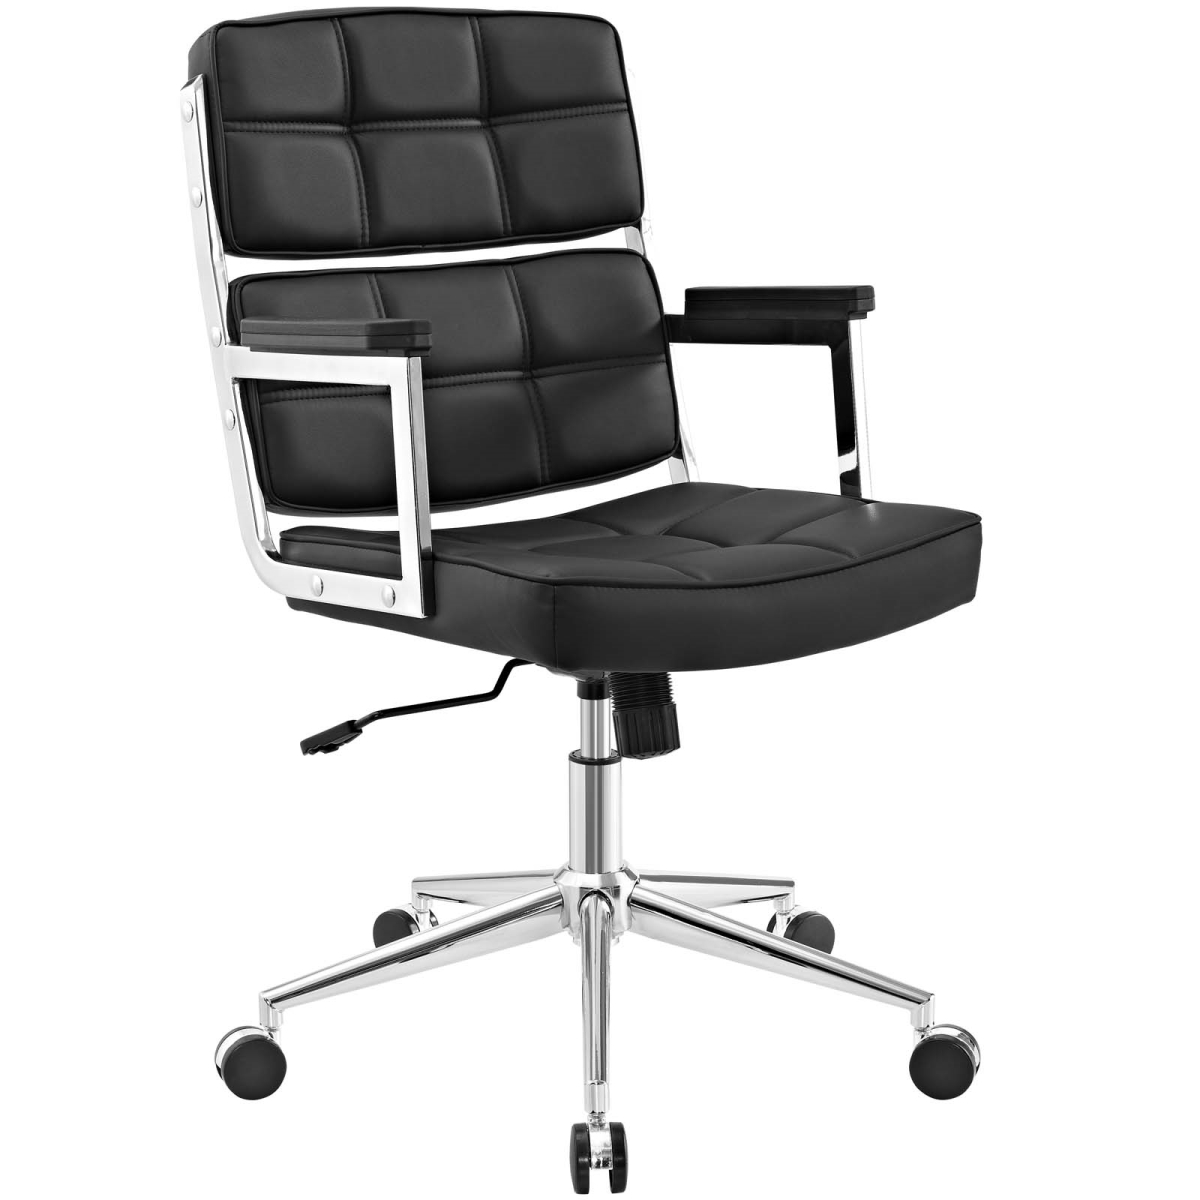 Modway Eei-2685-blk 37 - 39.5 H X 26 W X 25 L In. Portray Highback Upholstered Vinyl Office Chair, Black